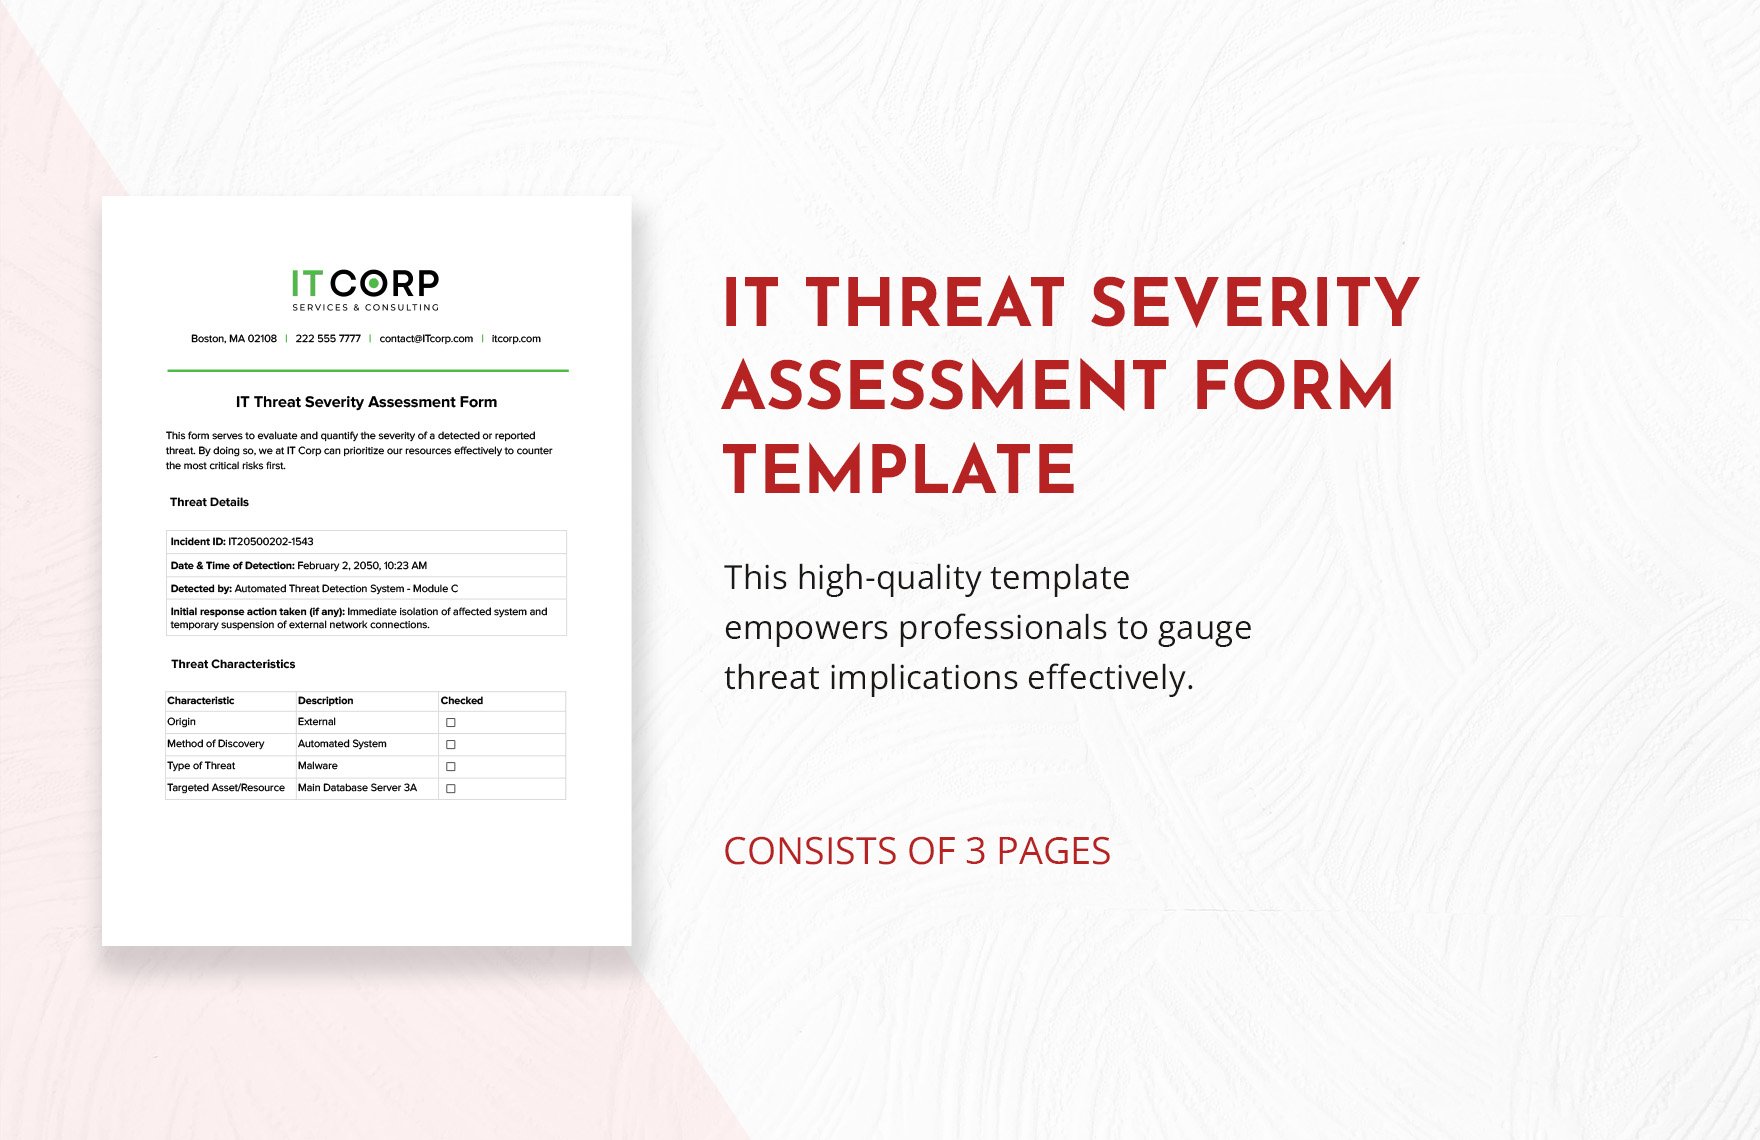 IT Threat Severity Assessment Form Template